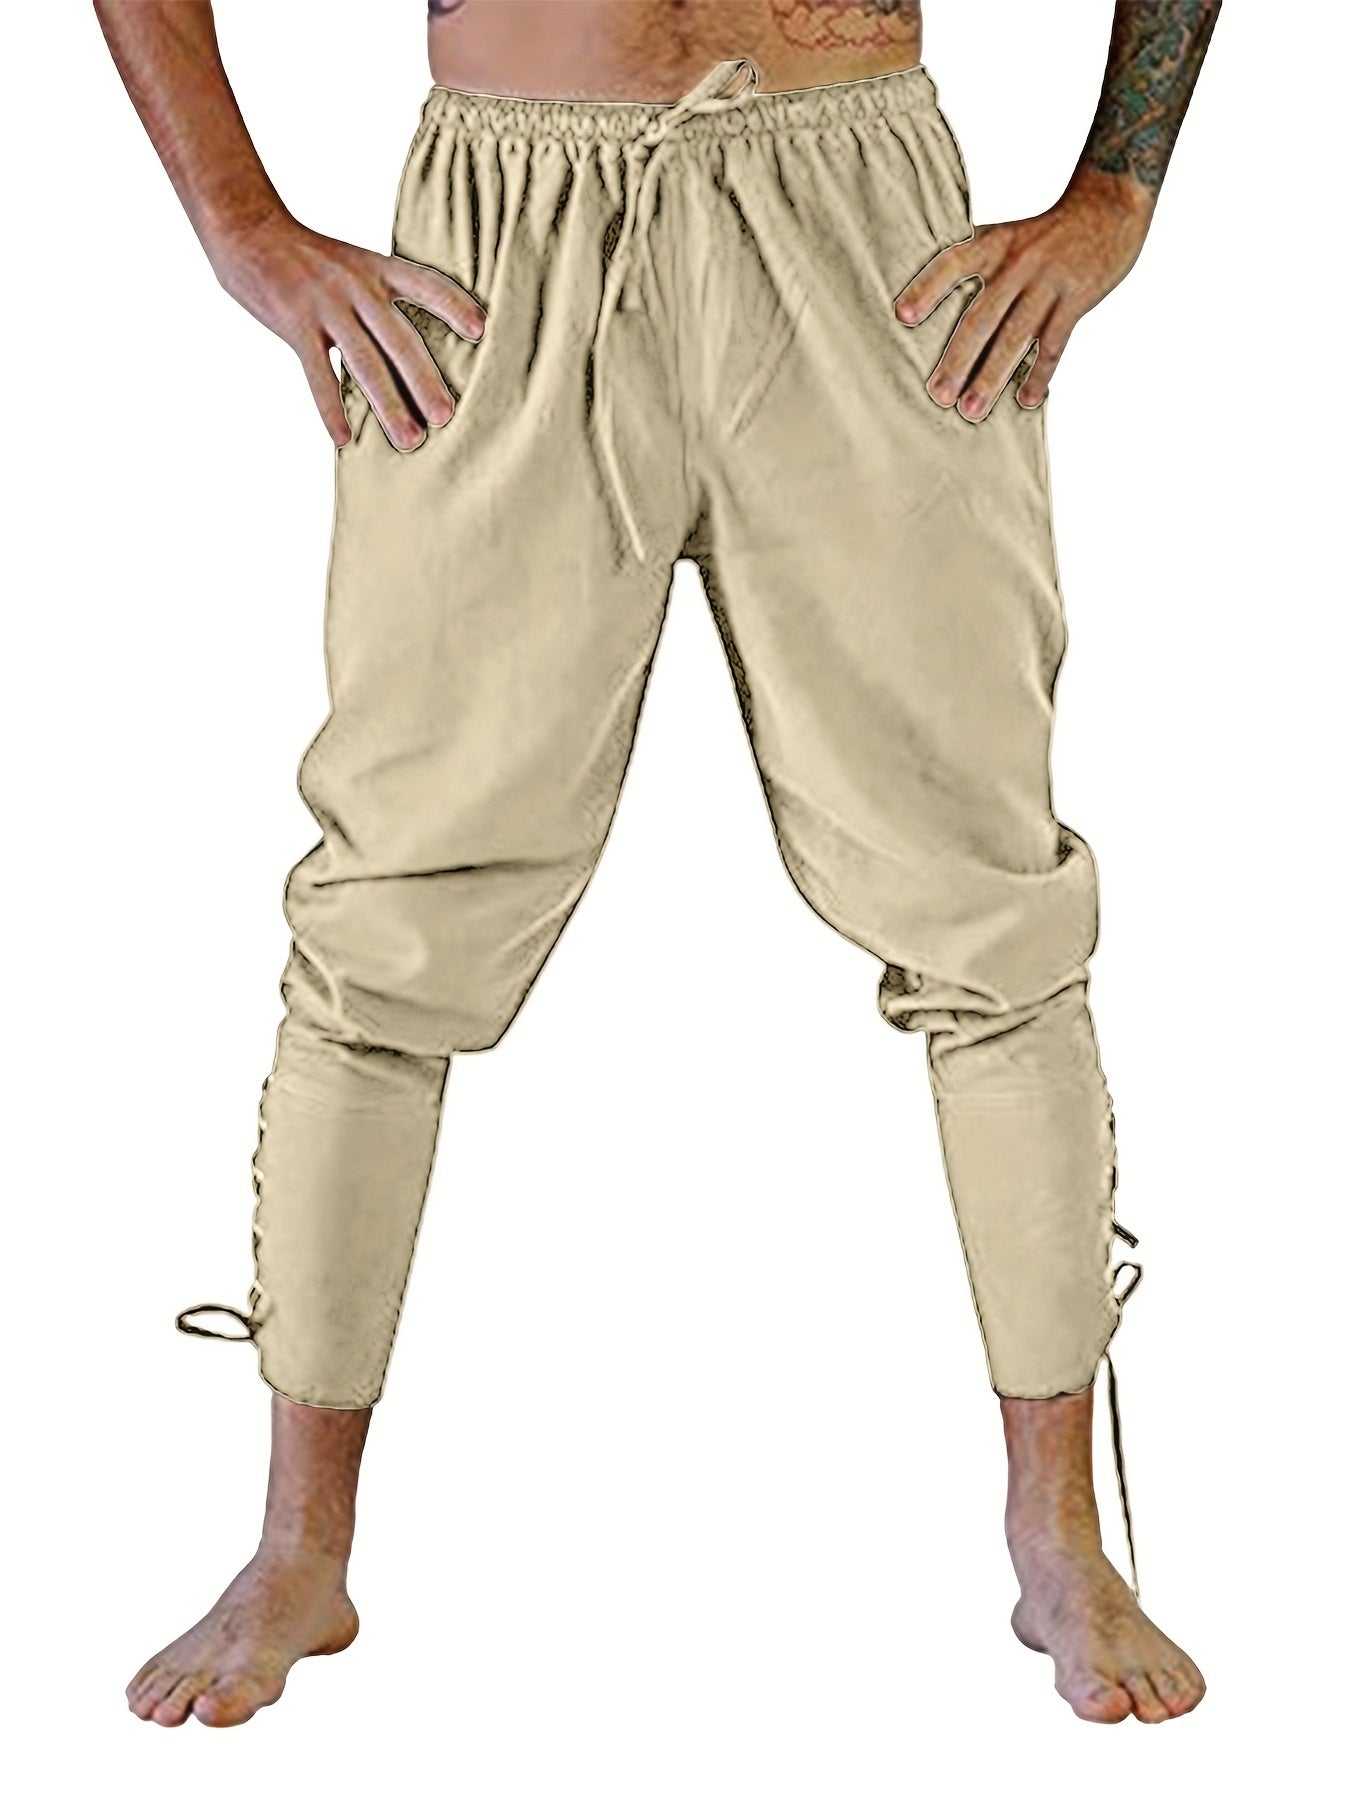 Men's Retro Medieval Renaissance Lace Up Loose Trousers Pants Costume Halloween Party Pirate Cosplay